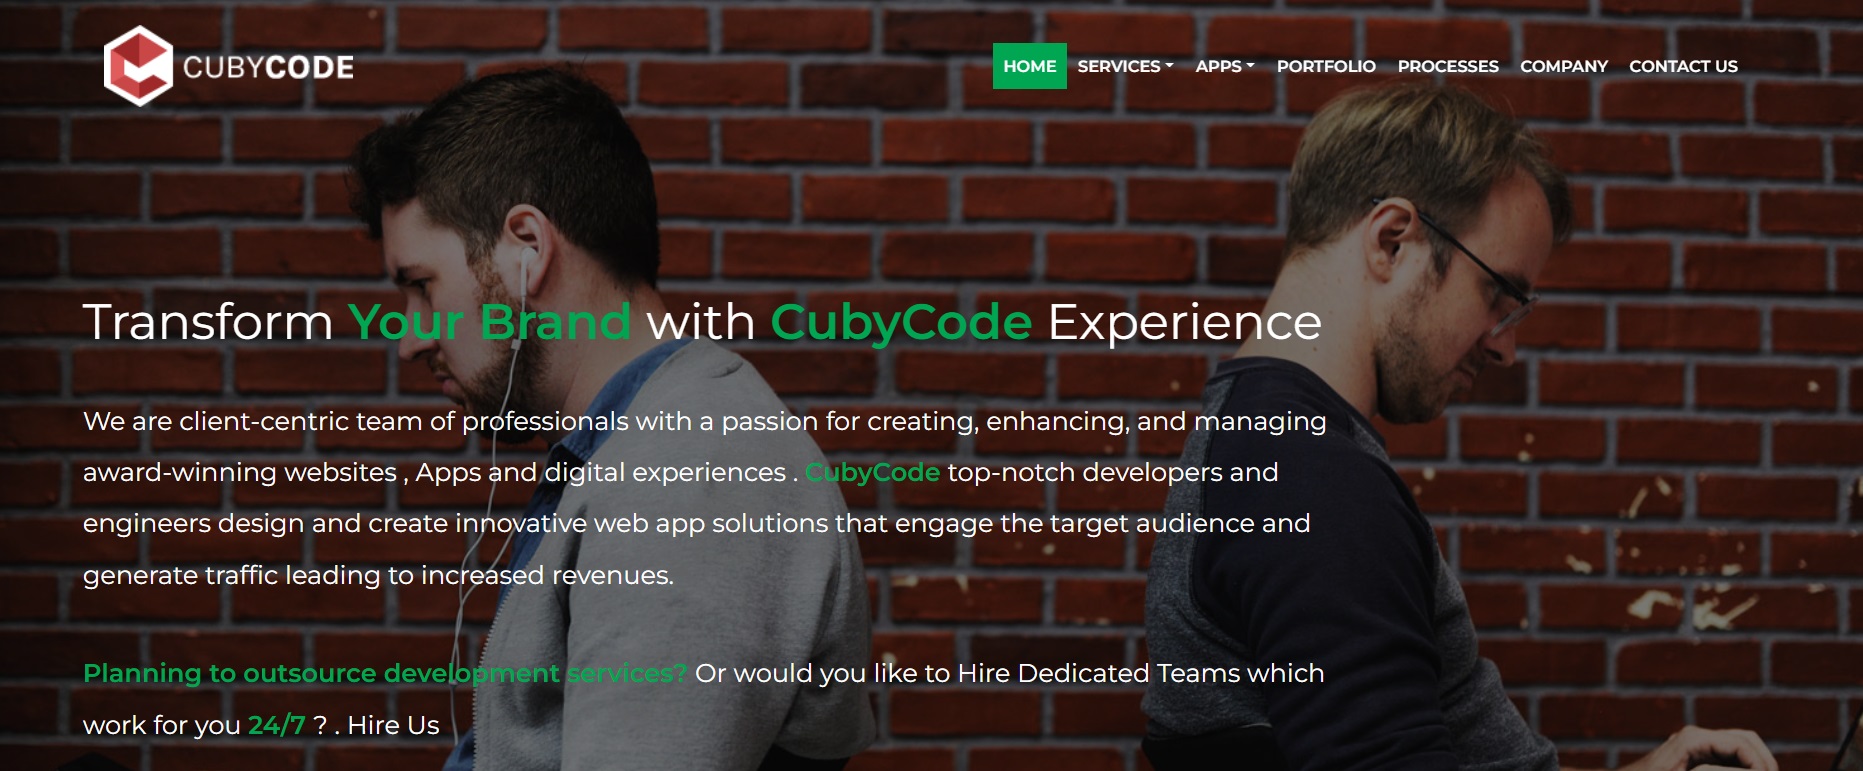 CubyCode